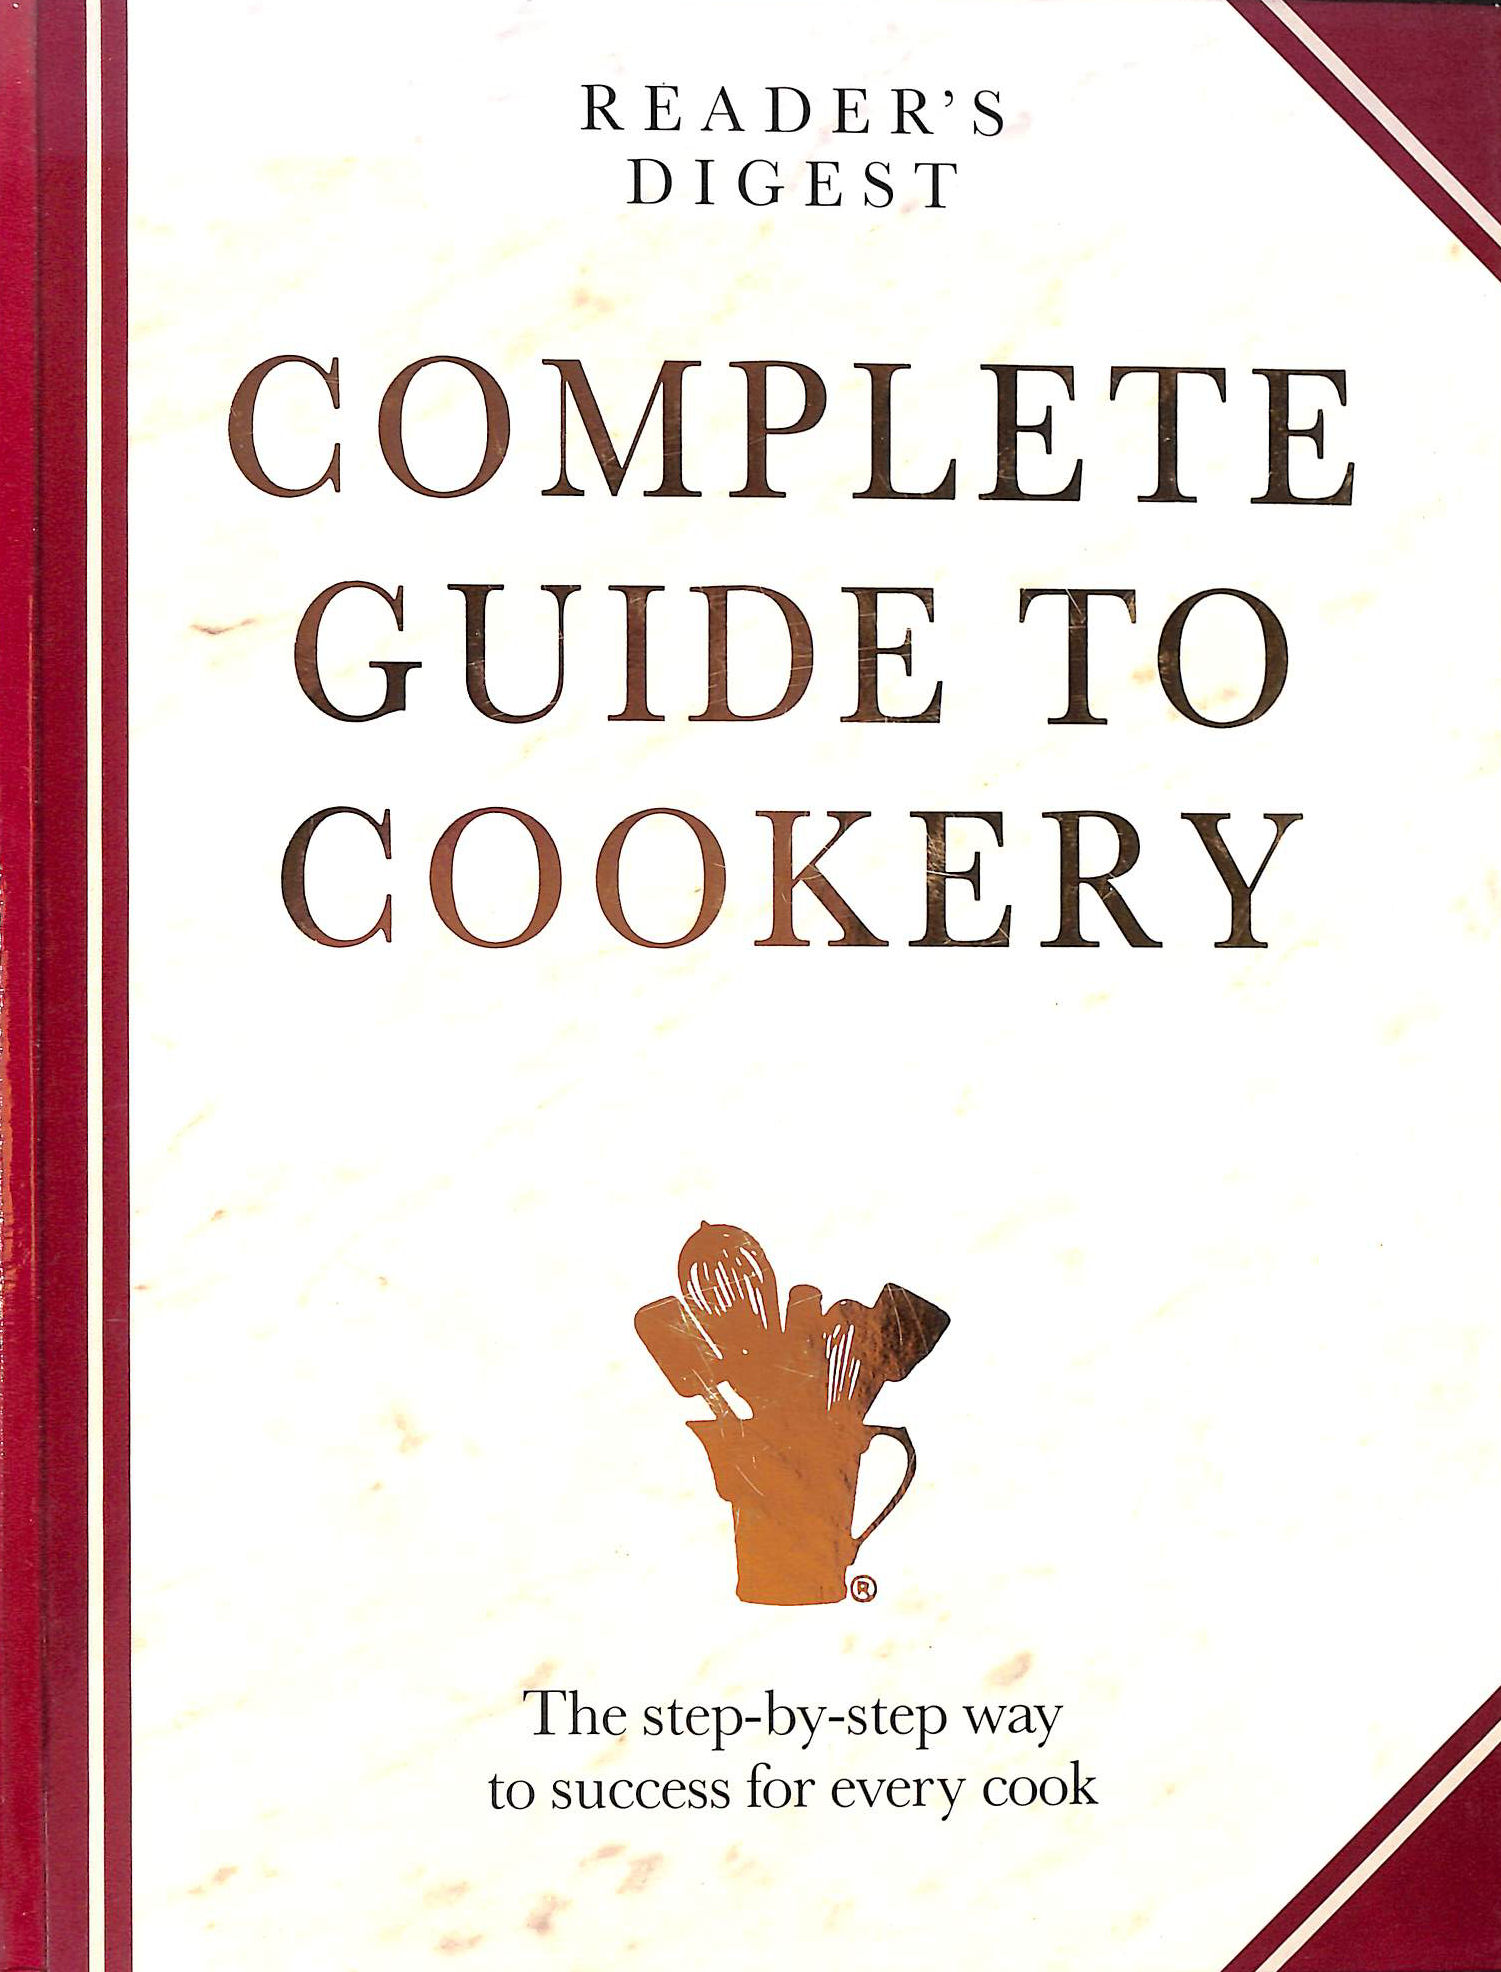 WILLAN ANNE - Reader's Digest Complete Guide to Cookery